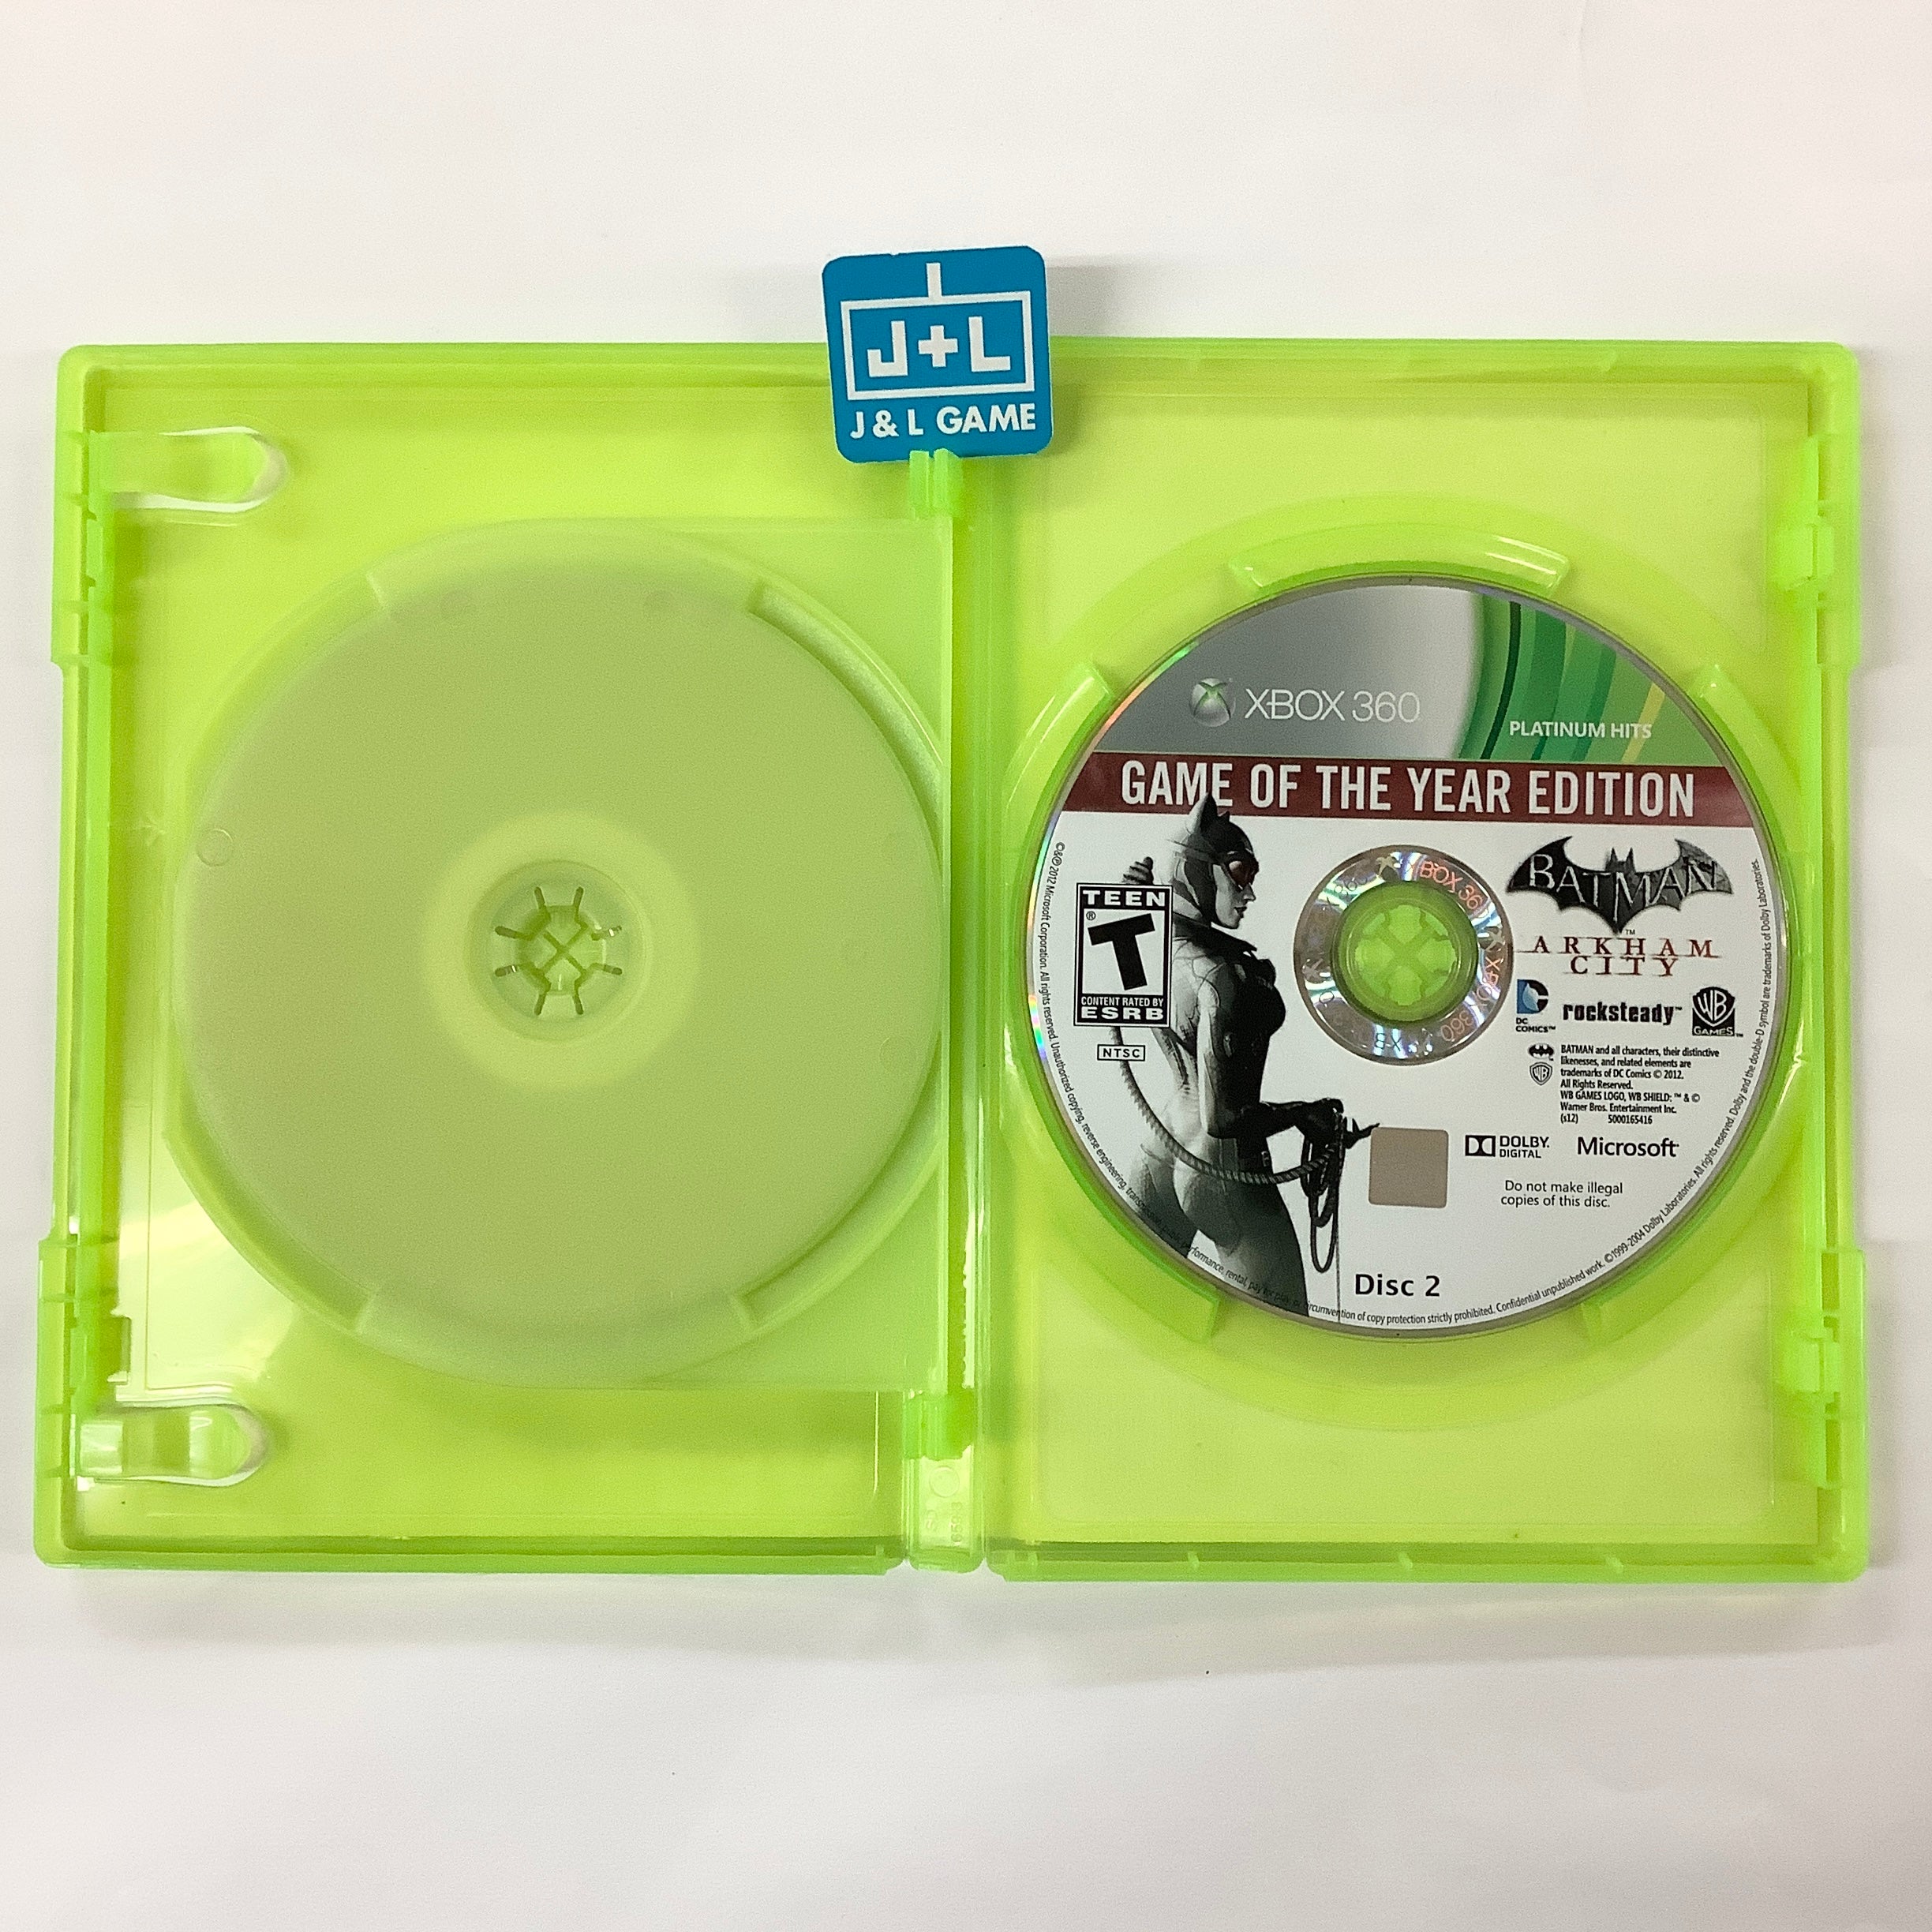 Batman: Arkham City - Game of the Year Edition (Platinum Hits) - Xbox 360 [Pre-Owned] Video Games Warner Bros. Interactive Entertainment   